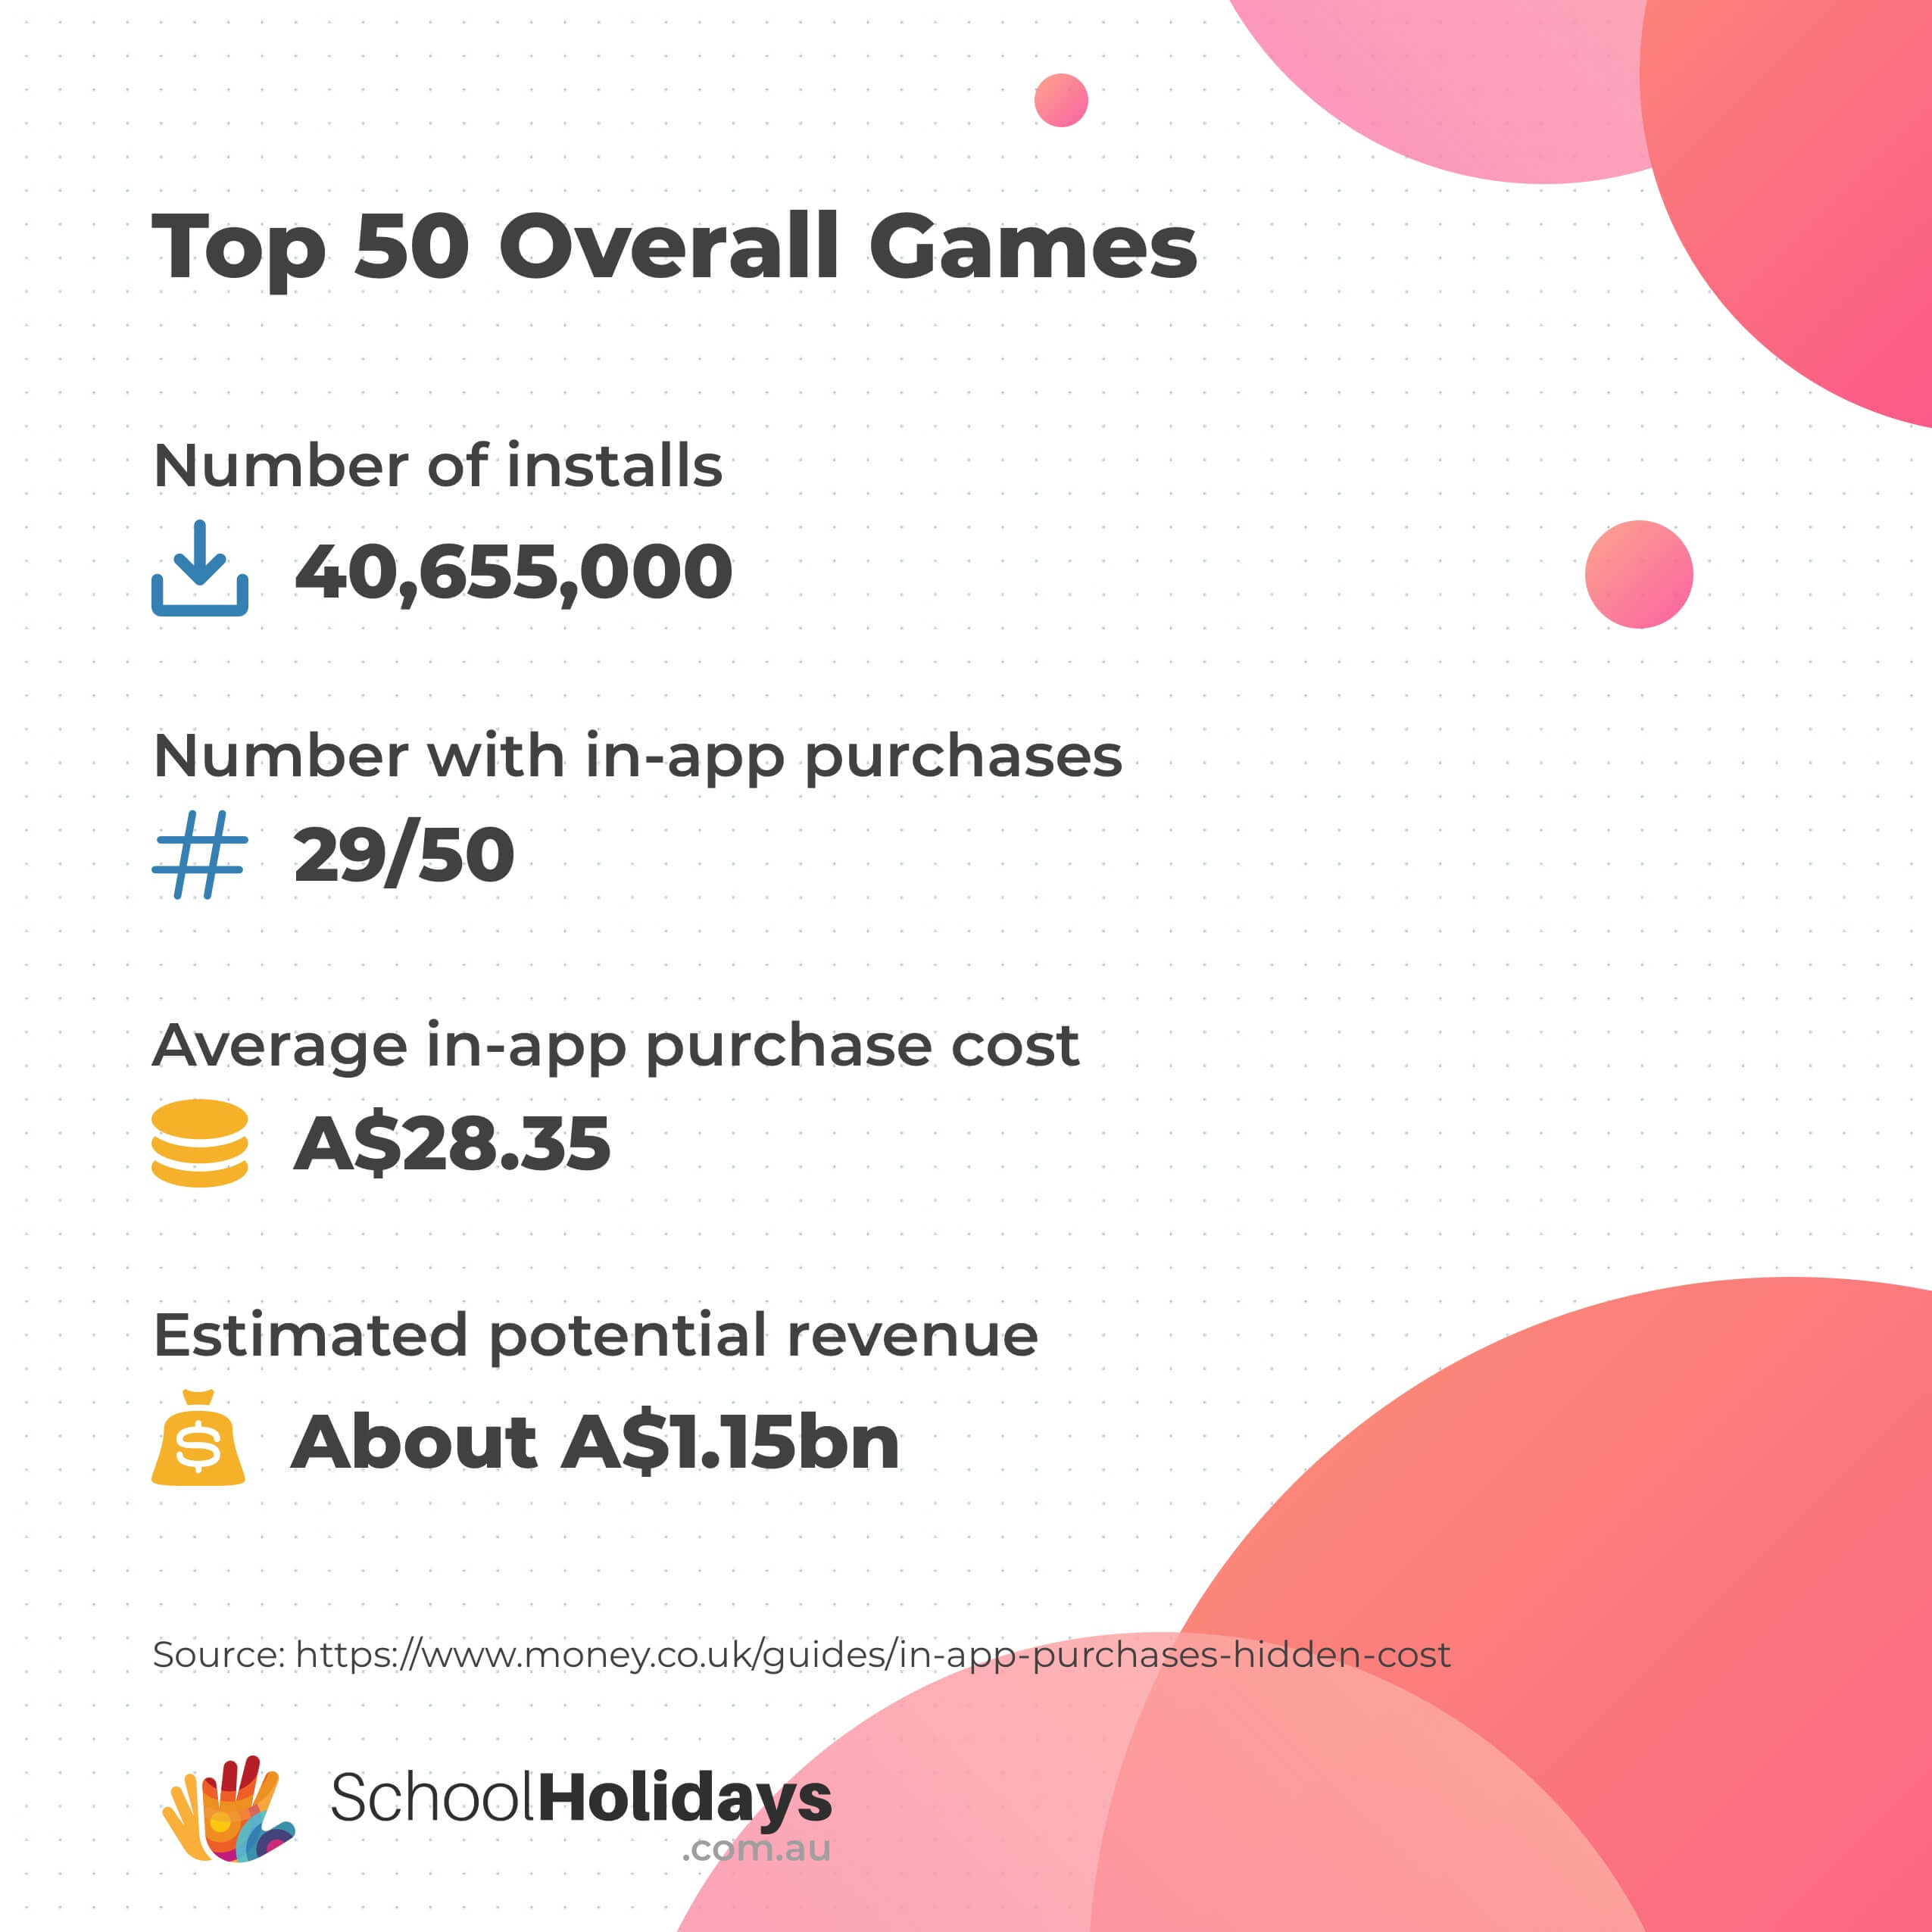 Google Play store's Top Free Games stats by Money.co.uk converted into Australian Dollars as of 21 May 2020.